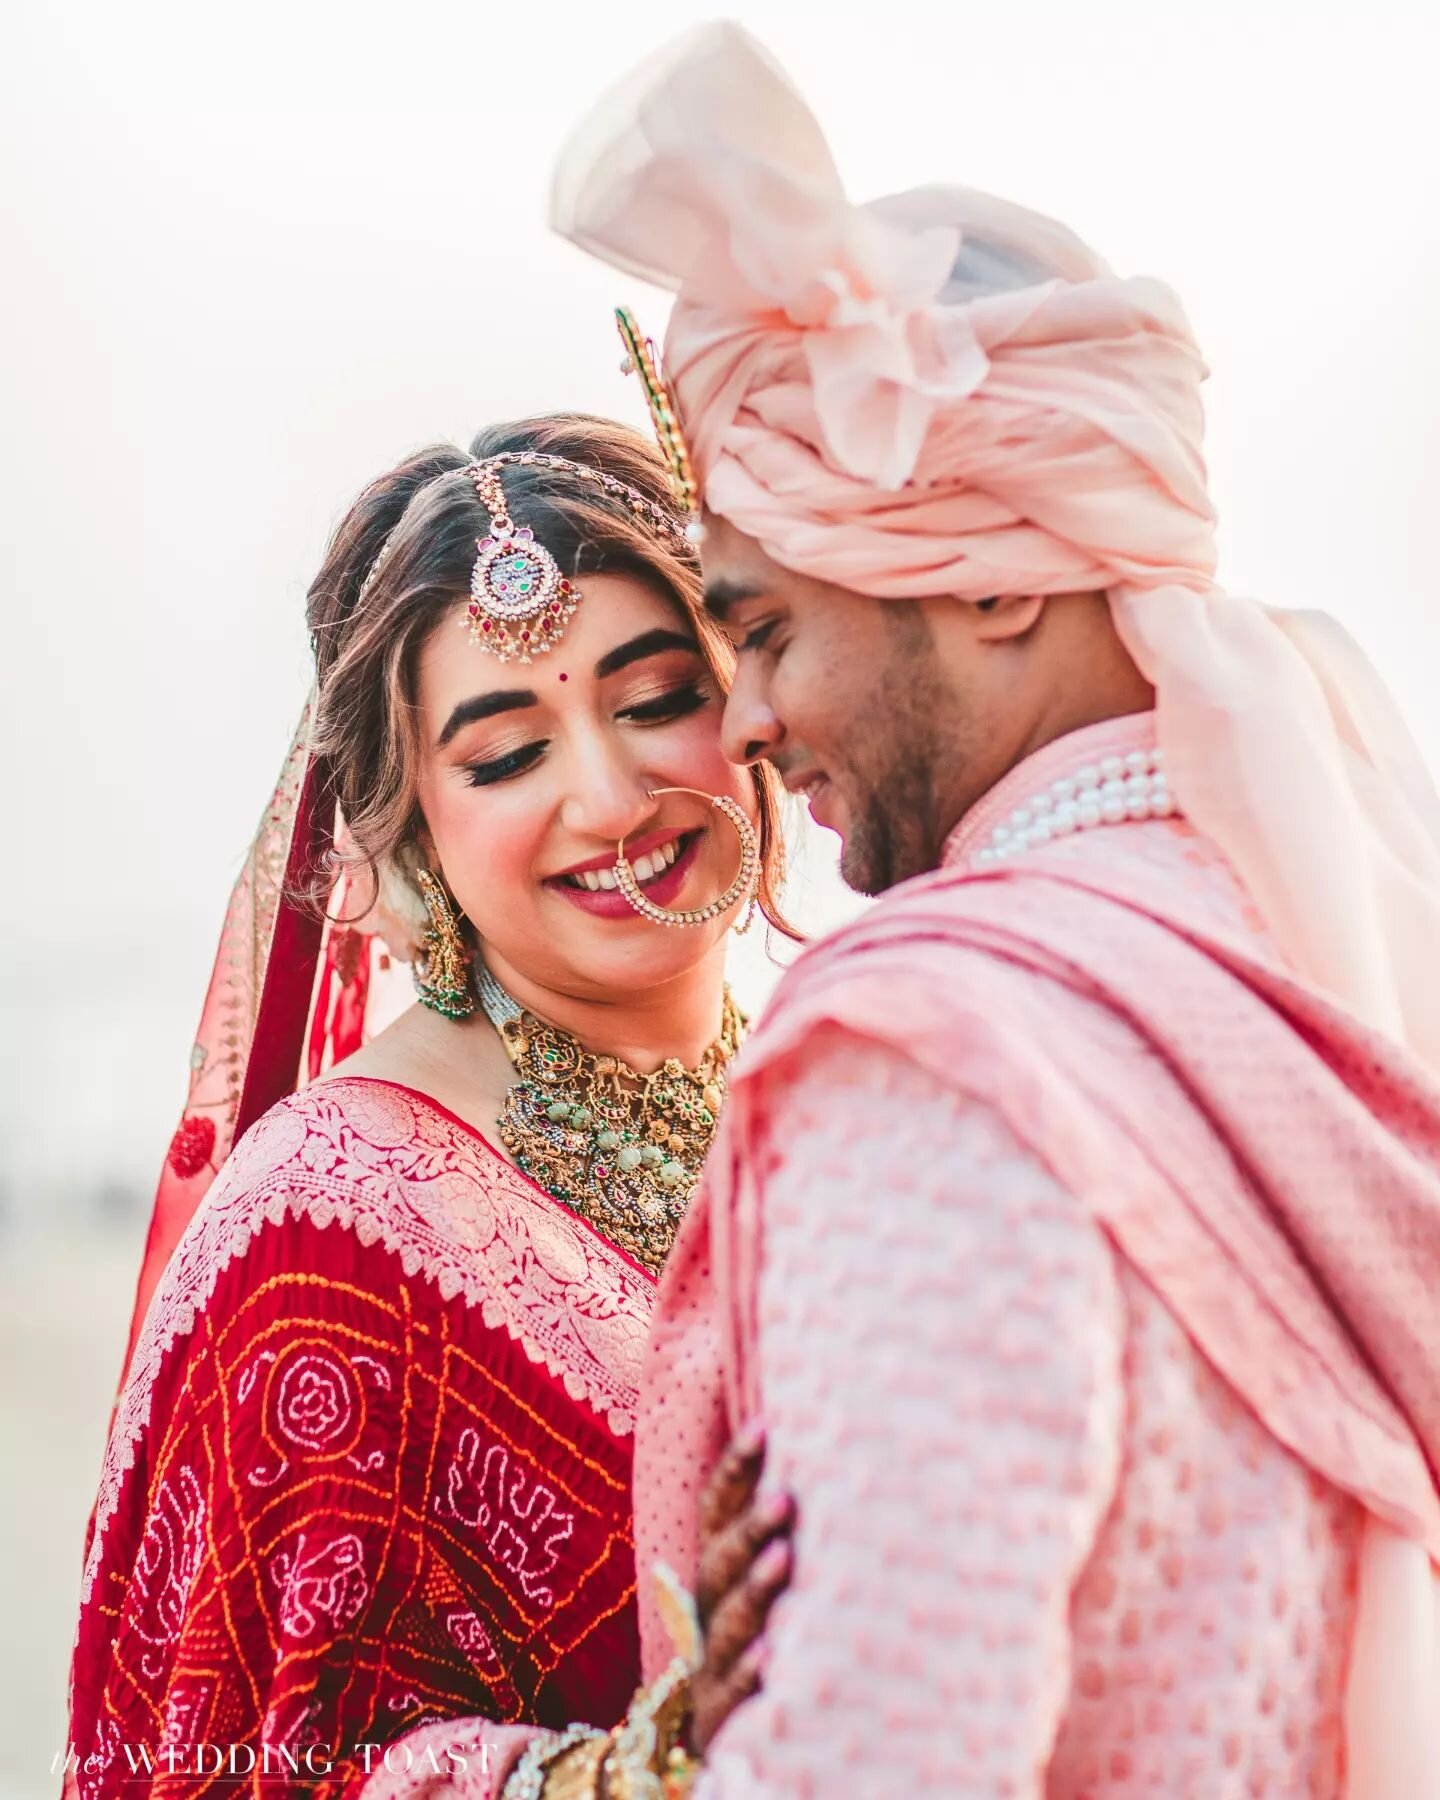 On the mumbai beach stood Lekhinee a vision in her flowy red bridal lehenga, swaying with every ocean breeze. 

And by her side, the dapper groom, Sourabh, looking absolutely regal in his off-white sherwani, adorned with a soft pink dupatta and turba